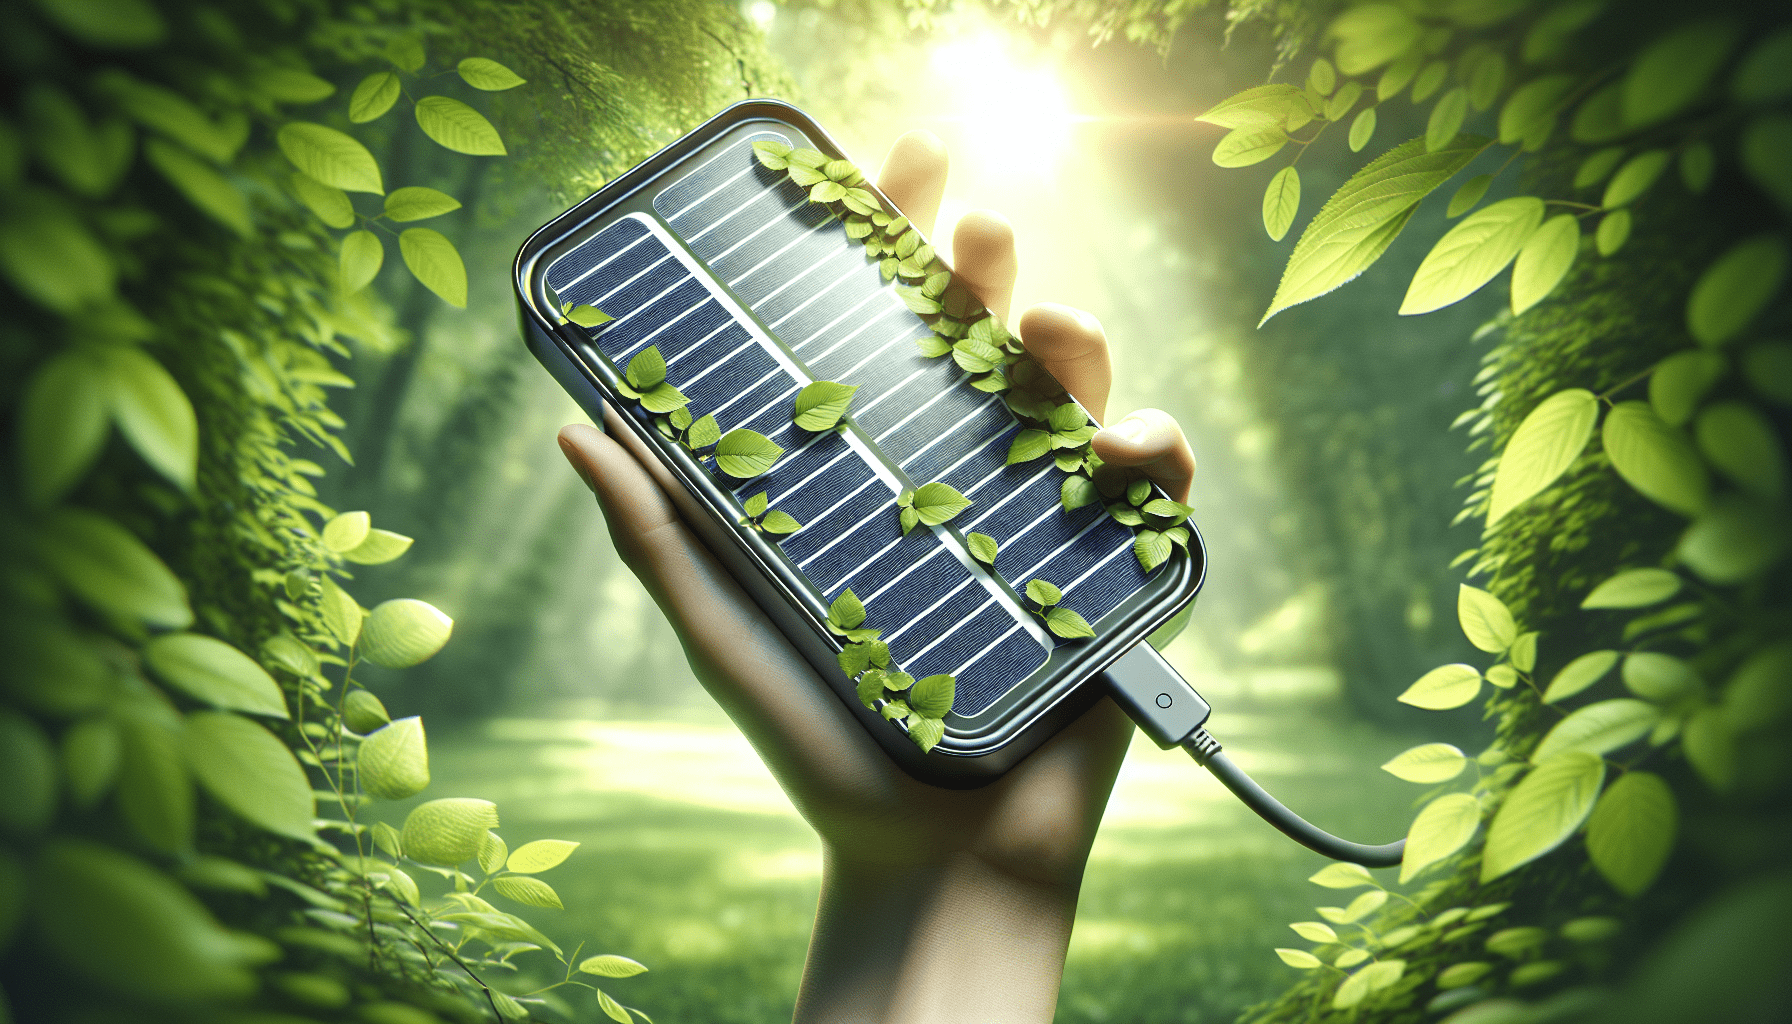 What Are The Benefits Of Using Eco-friendly Gadgets?